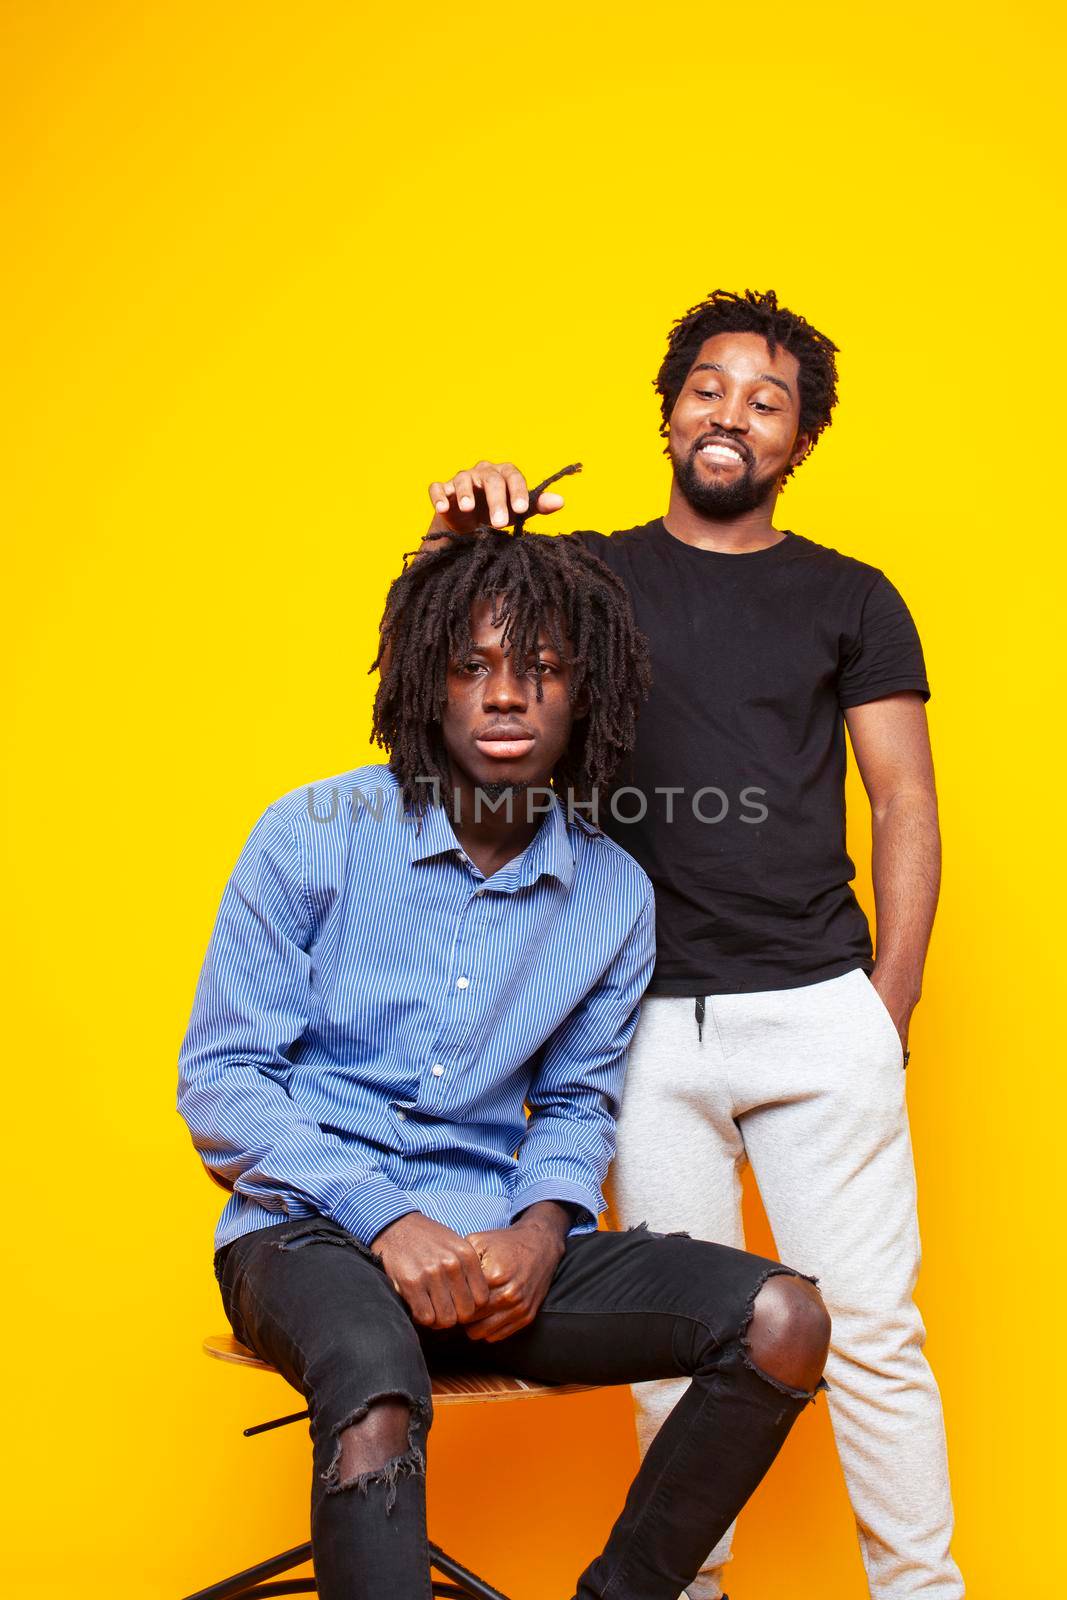 two african american guys posing cheerful together on yellow background, lifestyle people concept by JordanJ